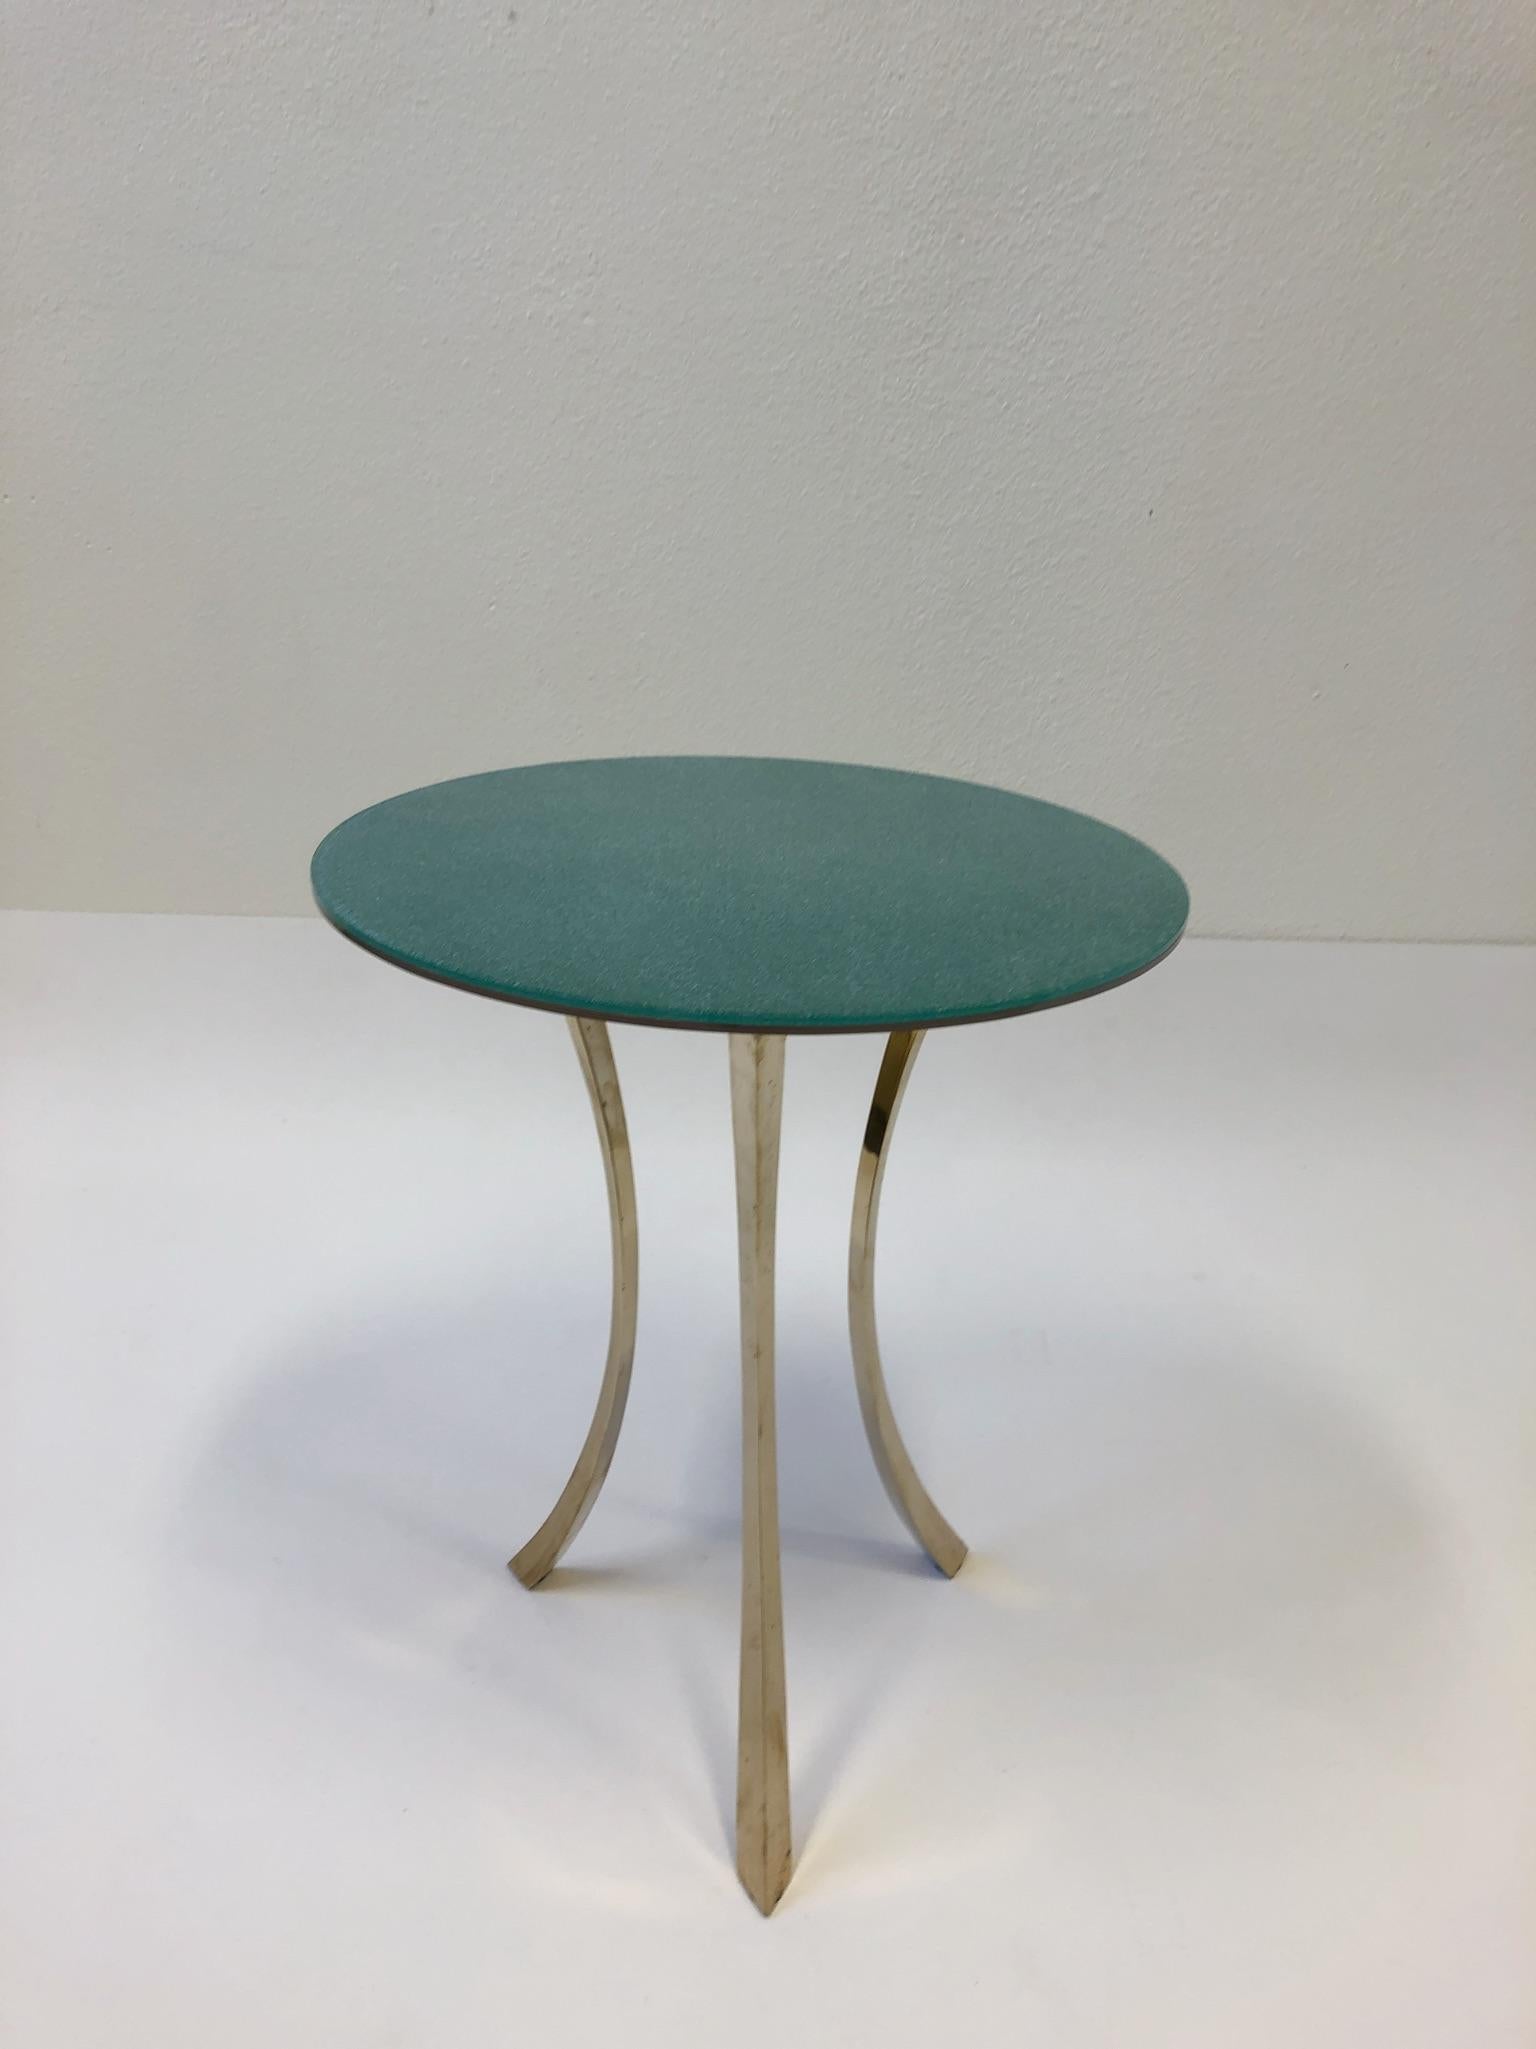 A beautiful solid polish bronze and glass occasional table with a reversi glass top. One side is emerald green with white speckles and the other os pink with white speckles. 

Measures: 18” diameter 21.5” high.